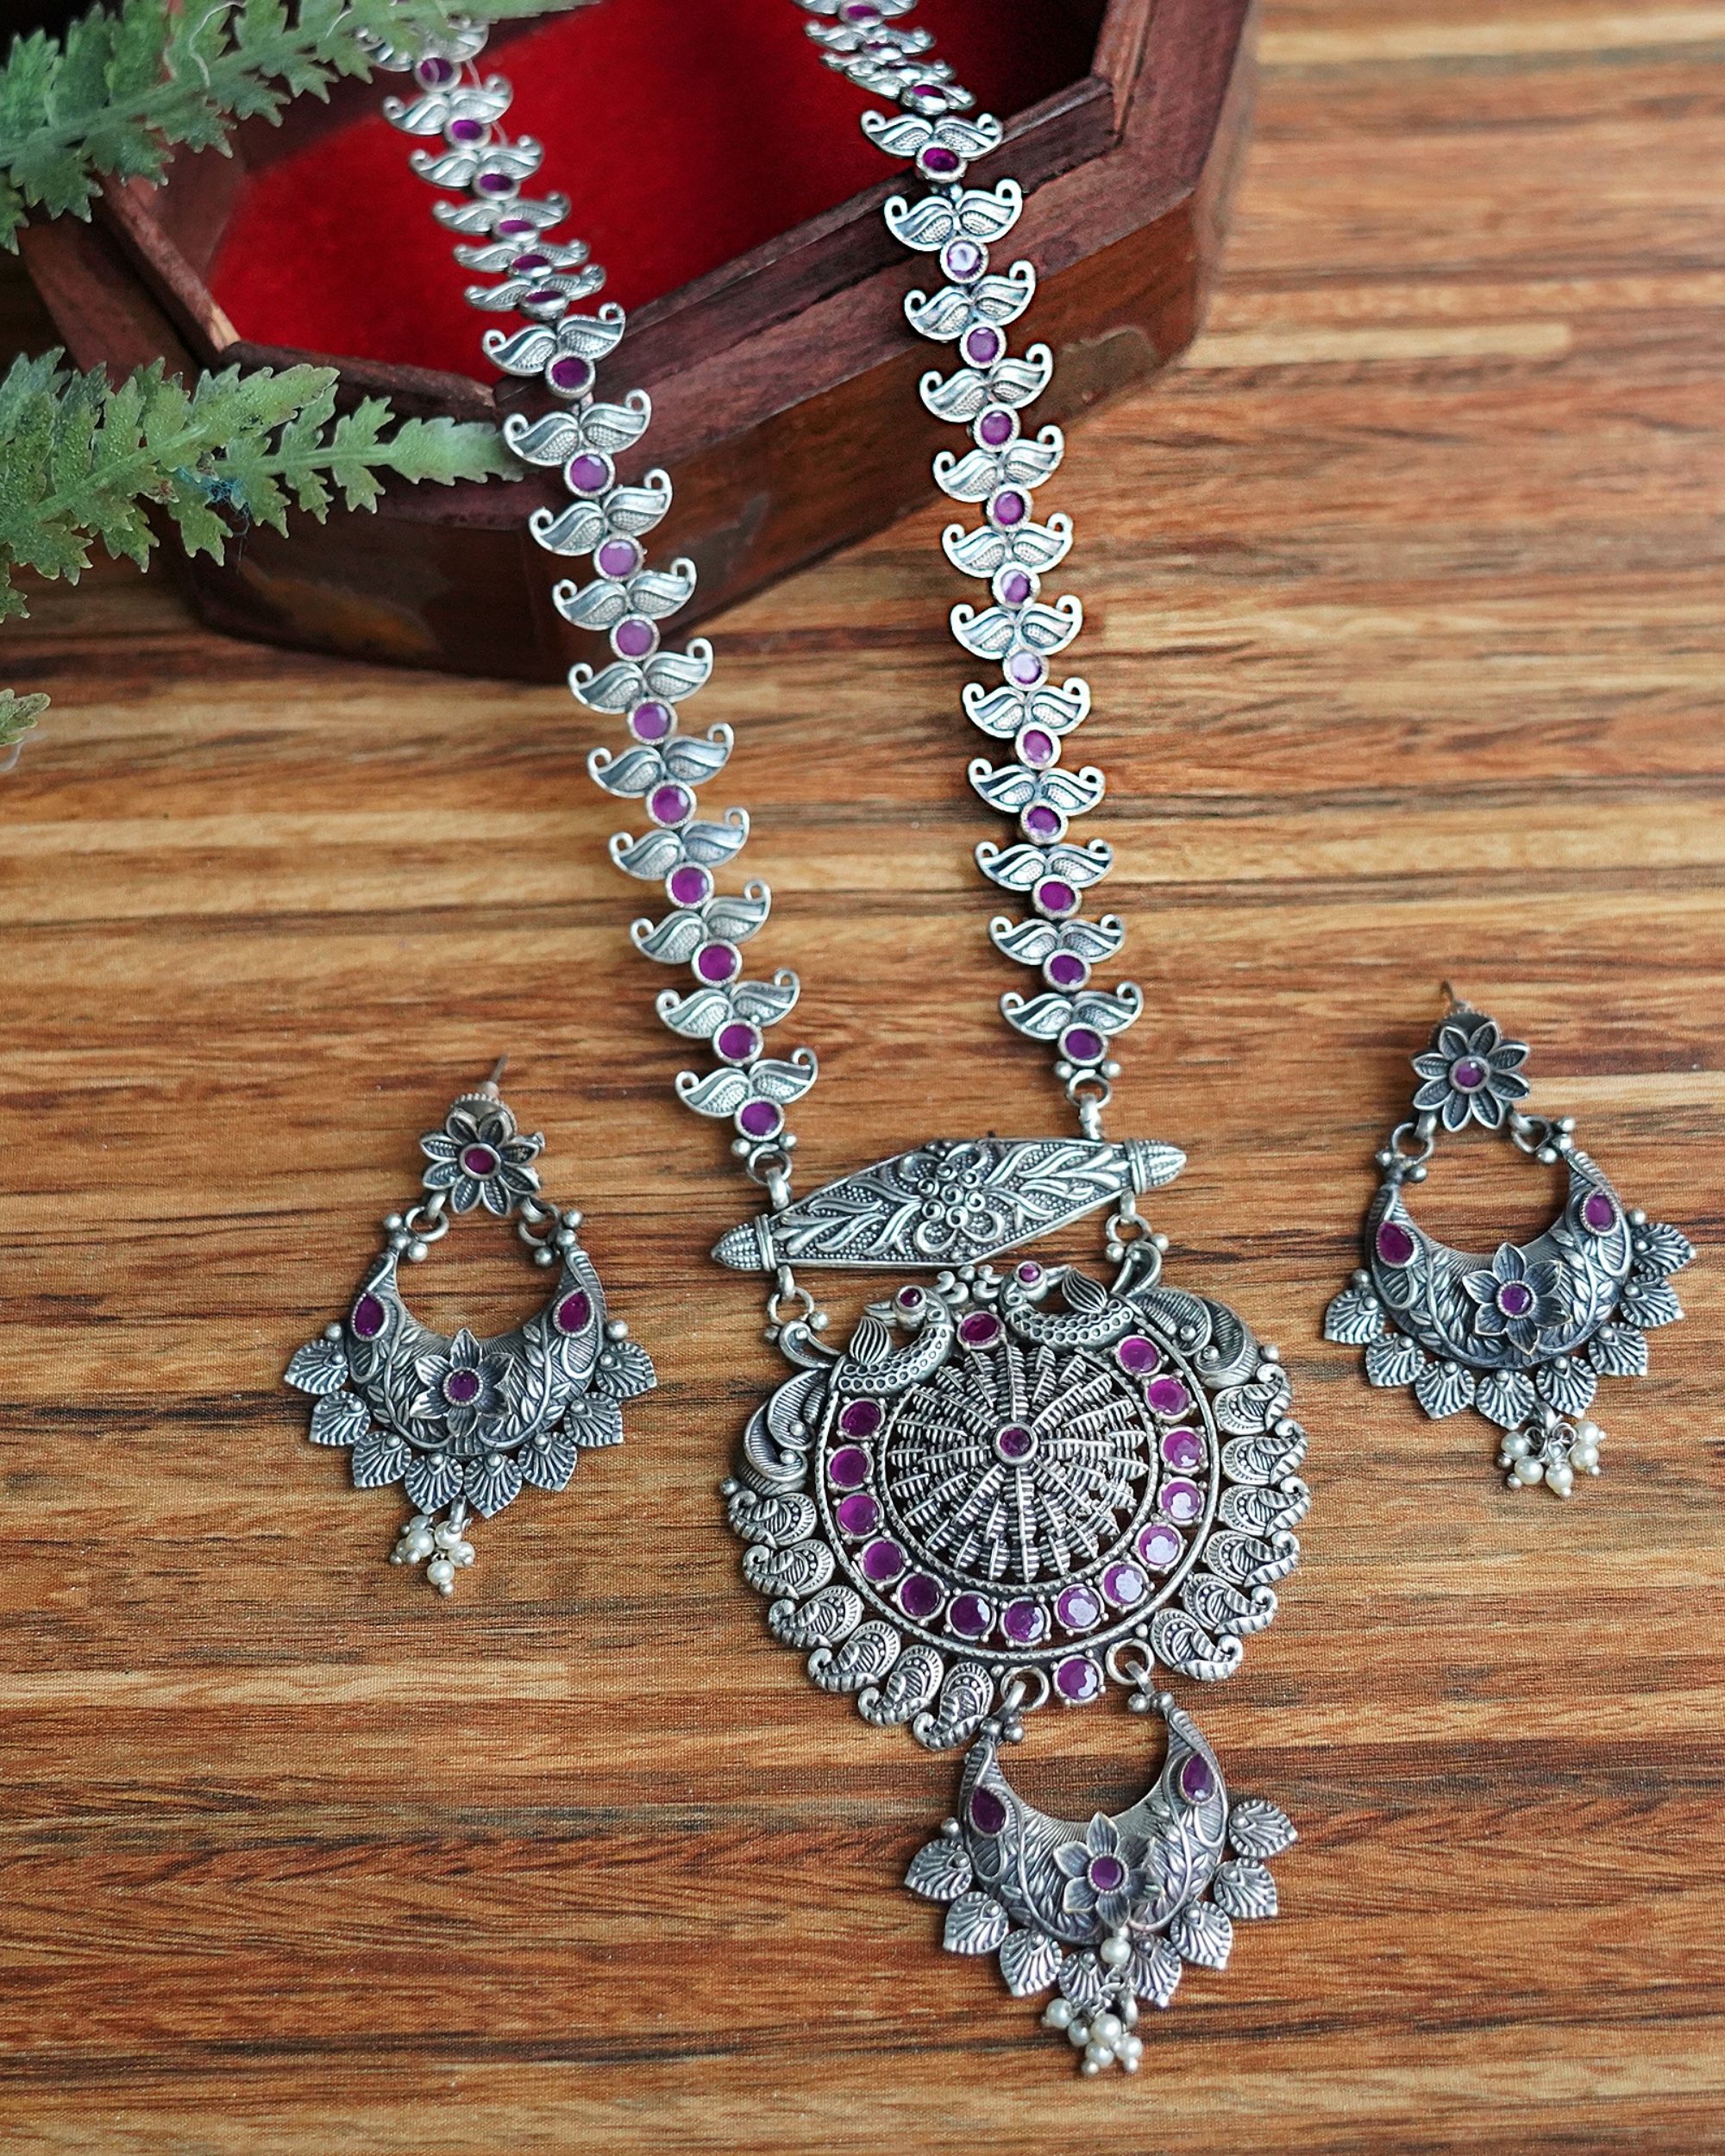 Peacock and floral engraved neckpiece with earrings - set of two.